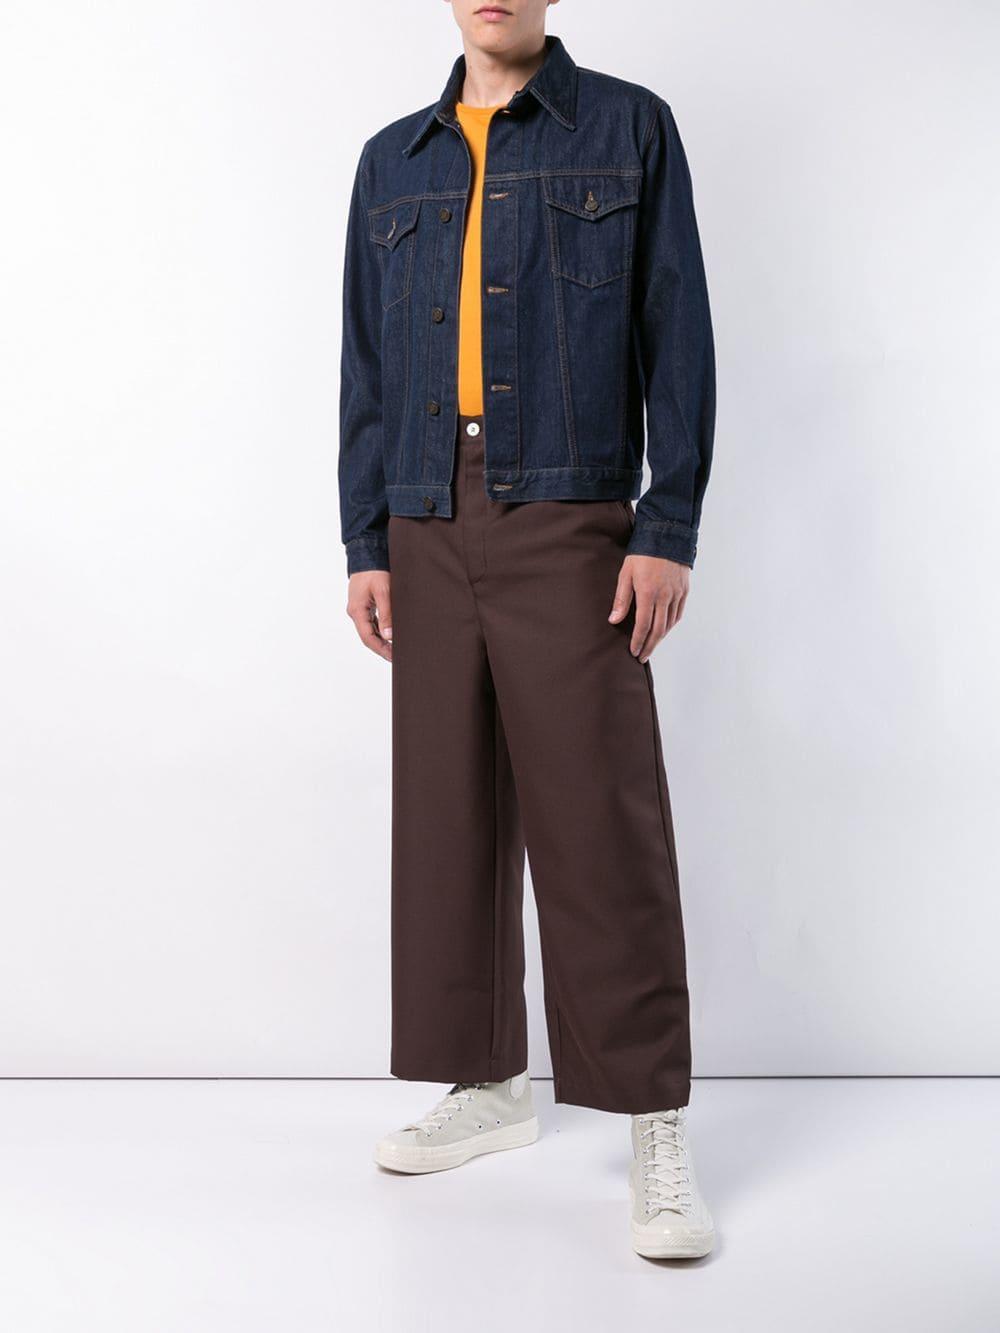 Lyst - Sunnei Wide Leg Chinos in Brown for Men